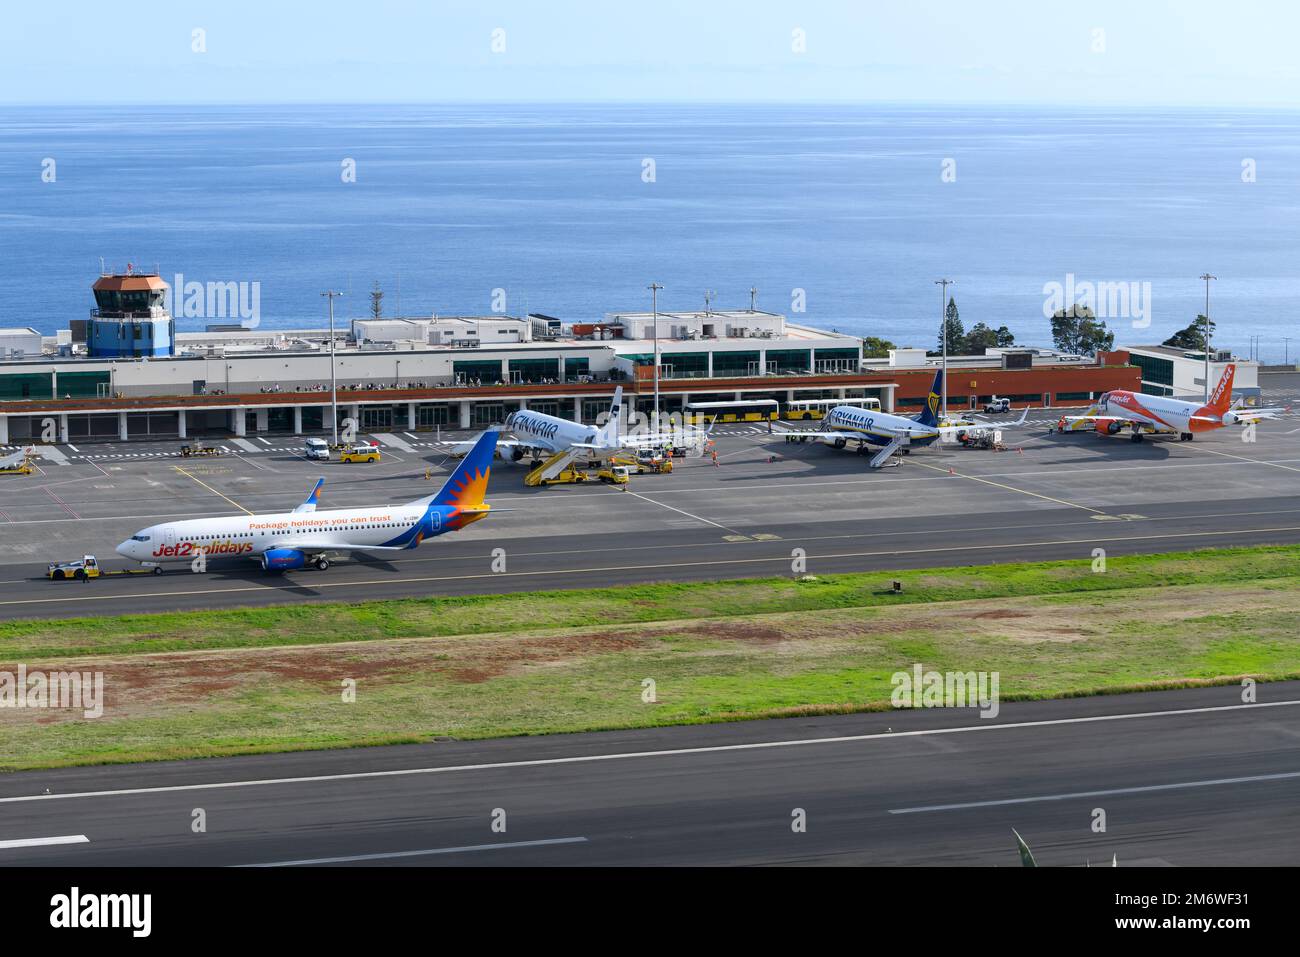 Funchal Airport passengers terminal exterior view. Madeira Airport ramp busy with multiple aircraft. Cristiano Ronaldo International Airport terminal. Stock Photo